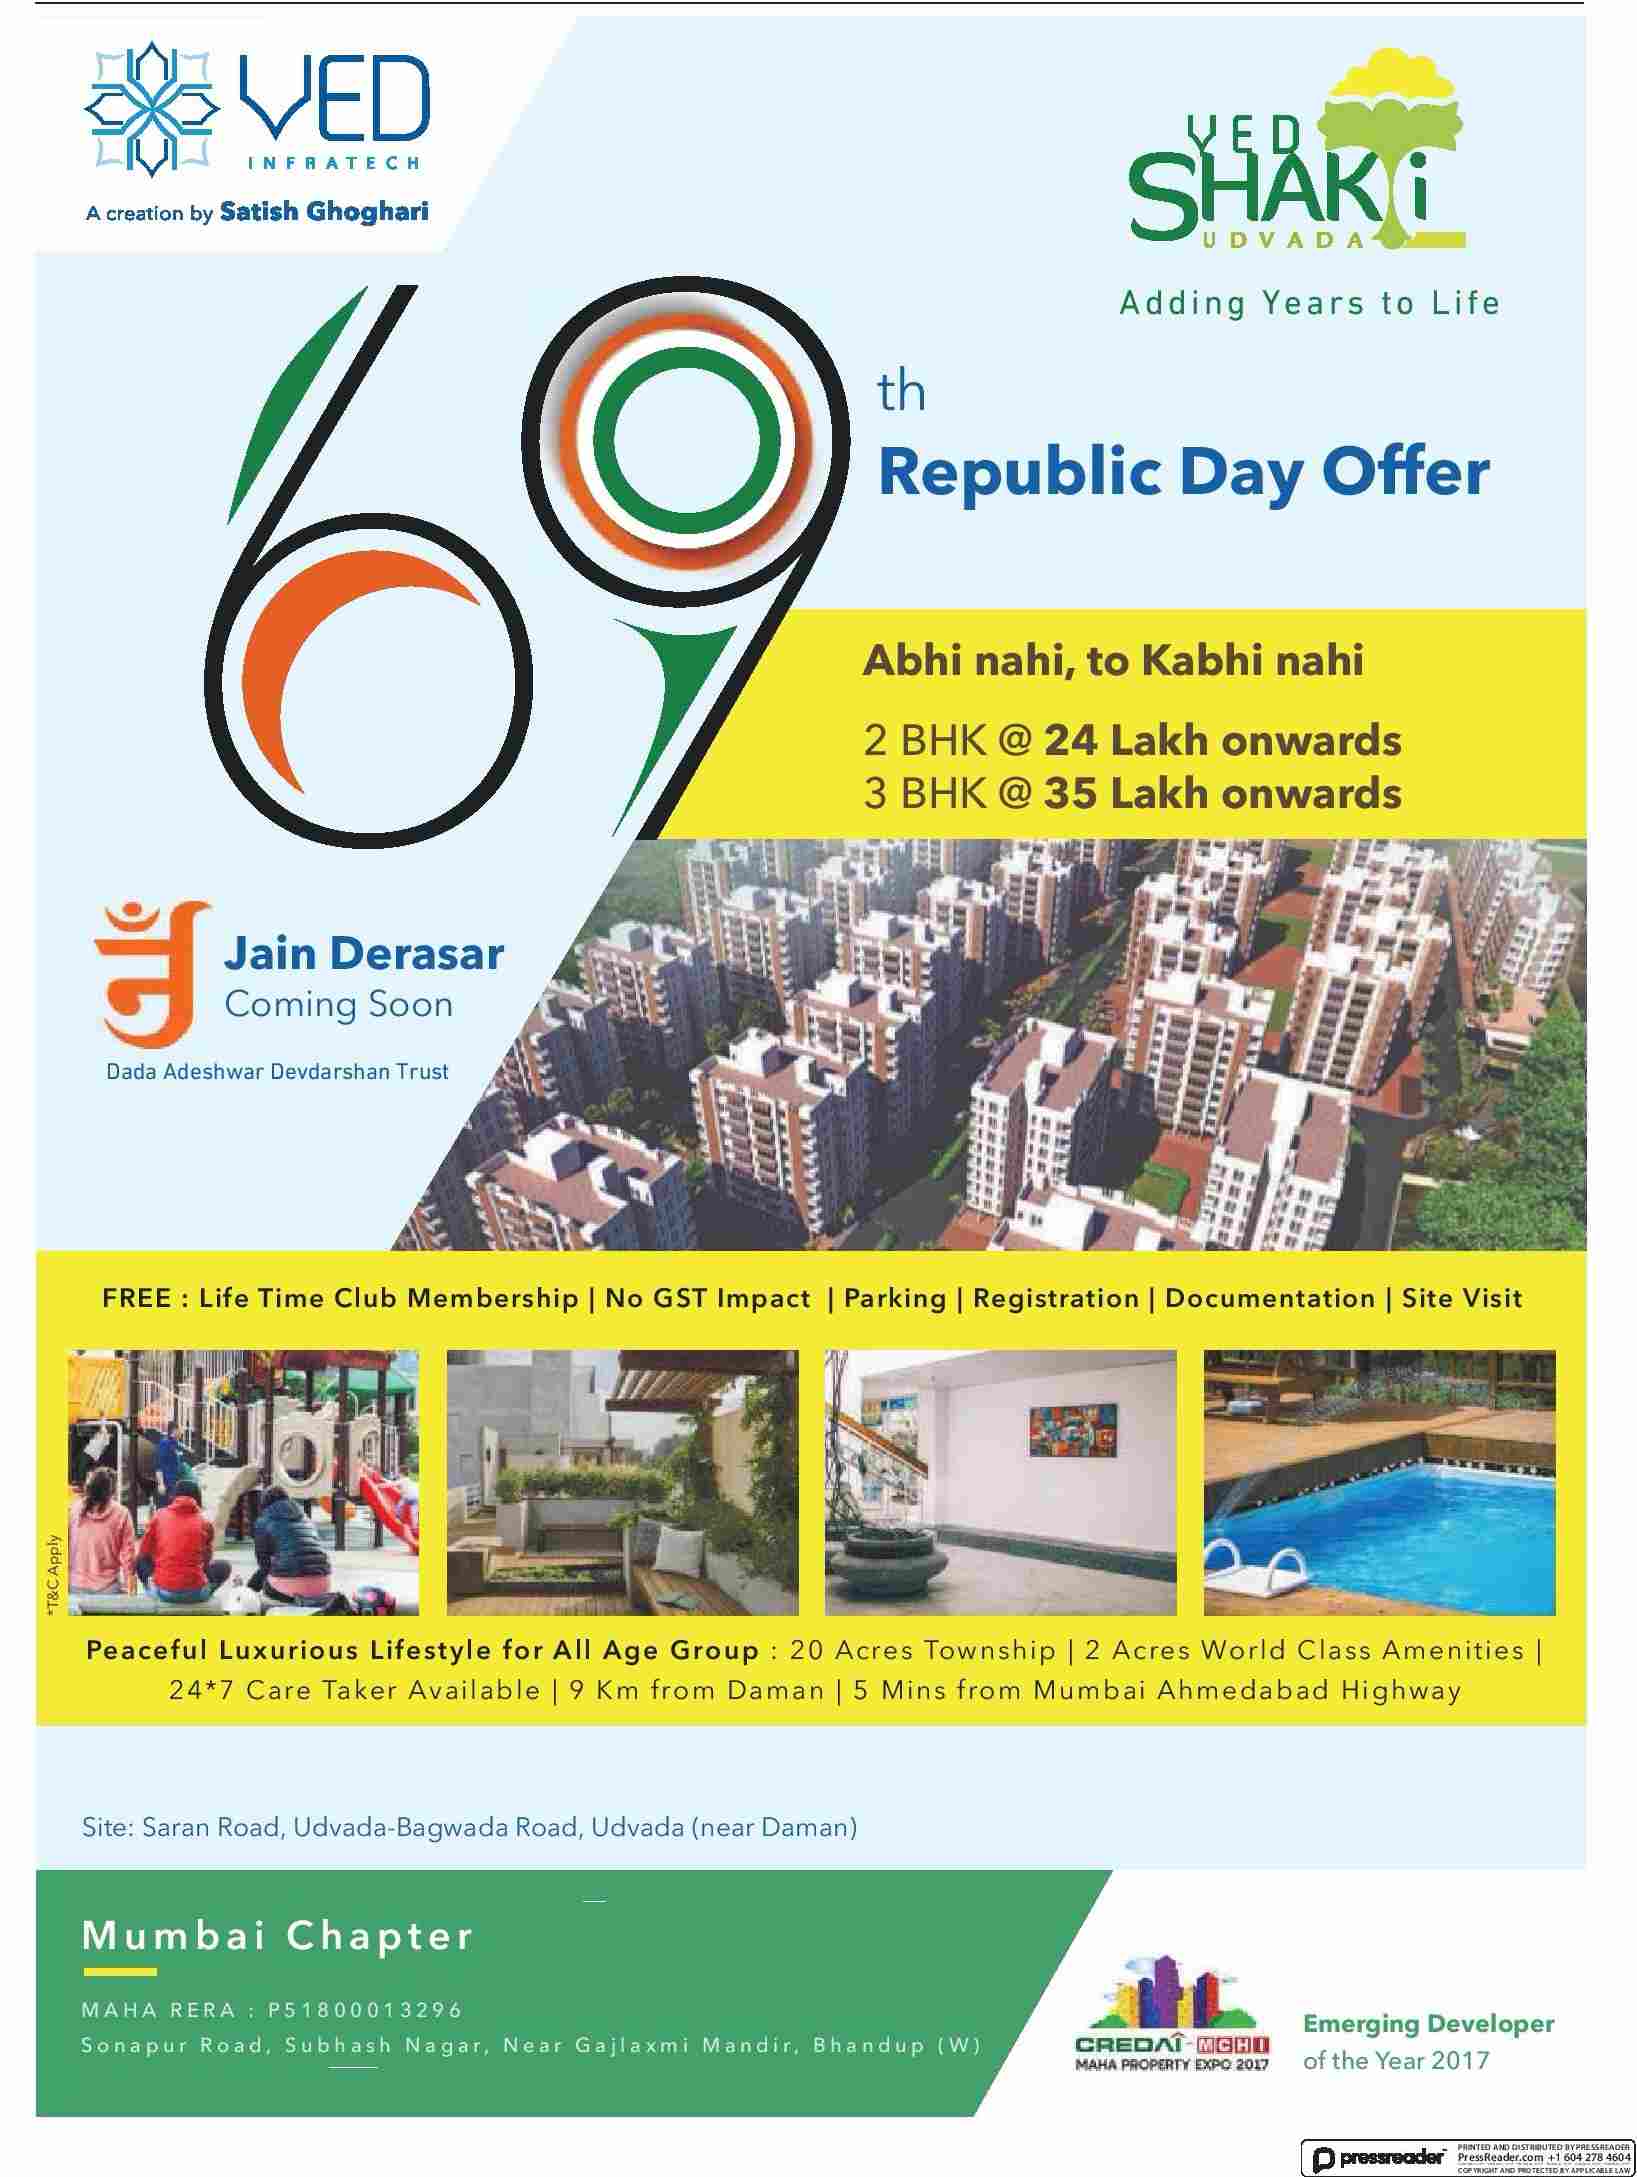 Avail the 69th Republic Day offer at Ved Shakti in Mumbai